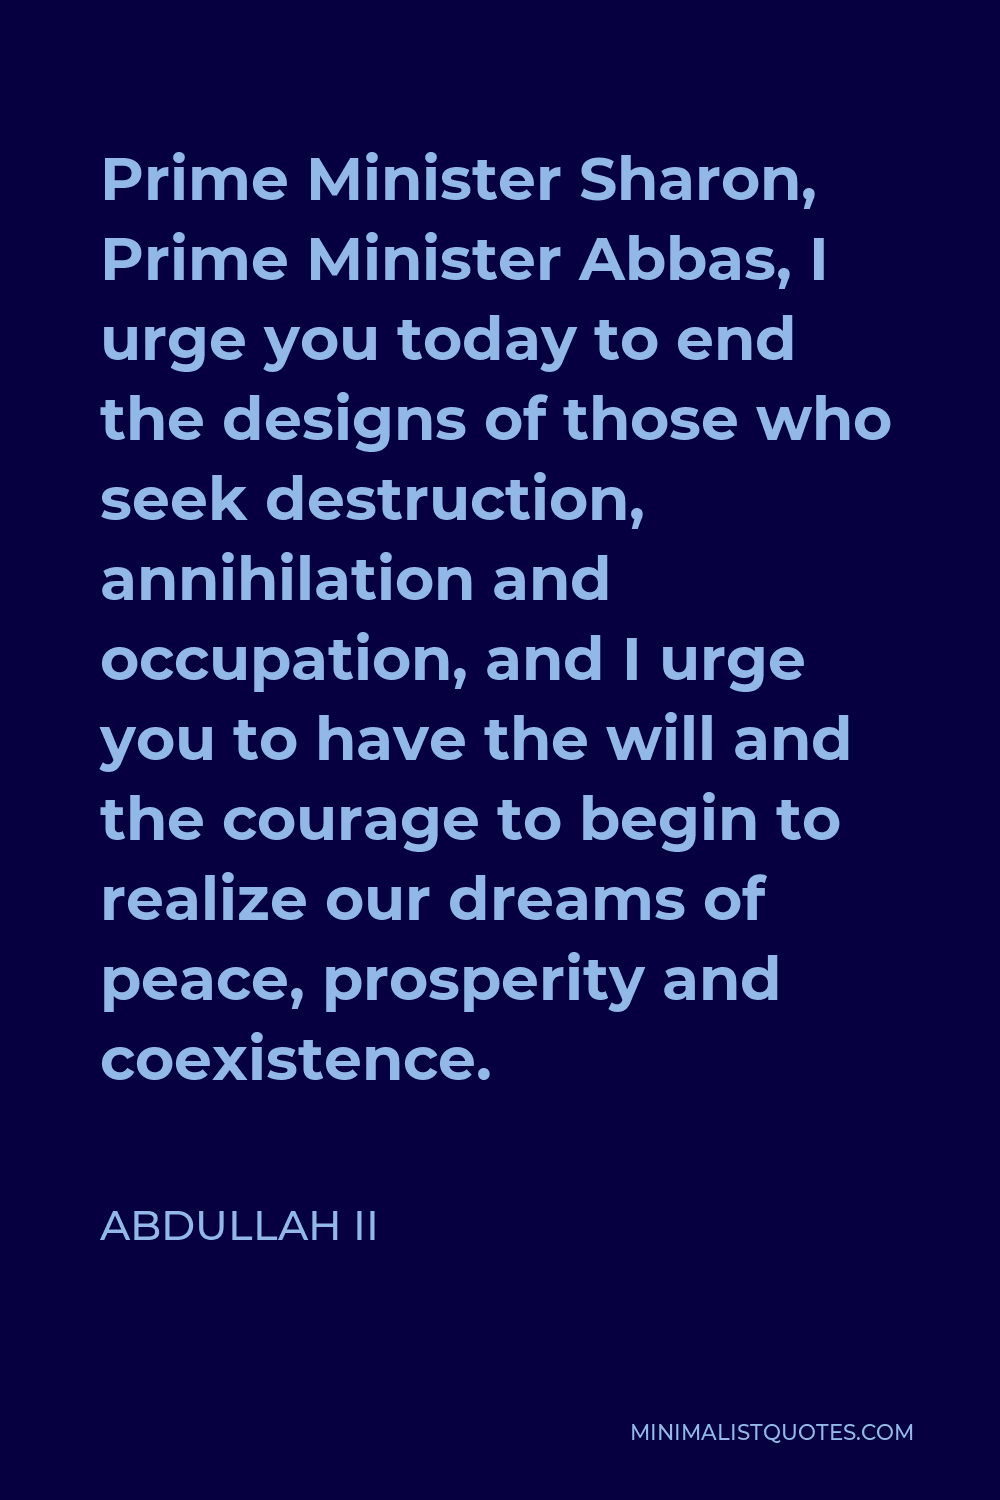 Abdullah II Quote - Prime Minister Sharon, Prime Minister Abbas, I urge you today to end the designs of those who seek destruction, annihilation and occupation, and I urge you to have the will and the courage to begin to realize our dreams of peace, prosperity and coexistence.